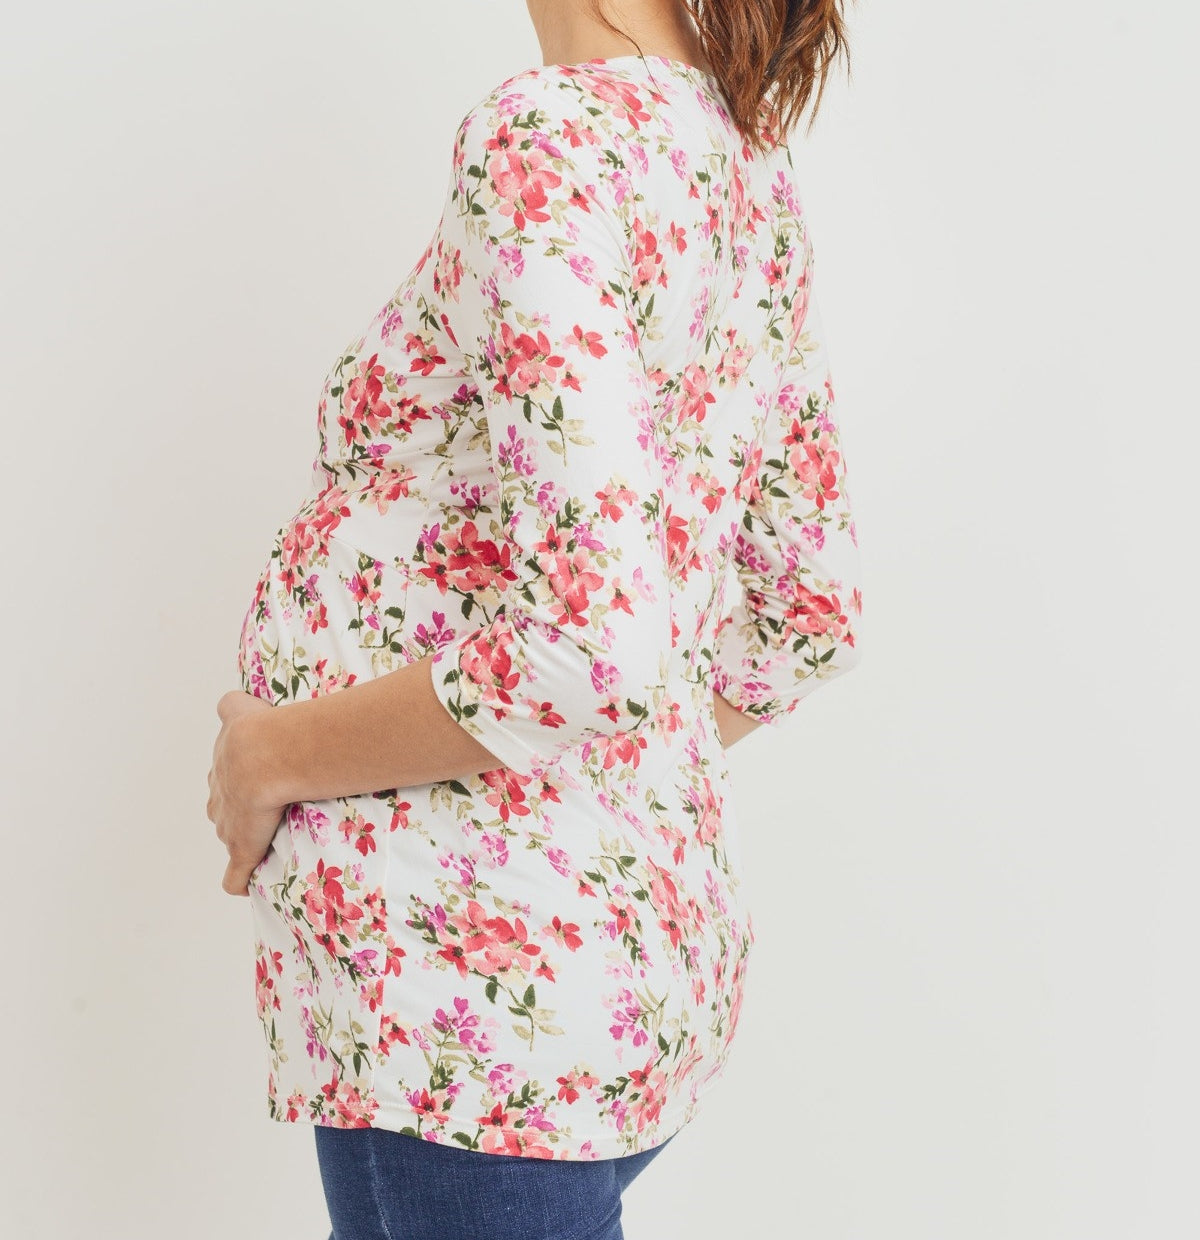 Pleated Maternity Top - Side/Back View